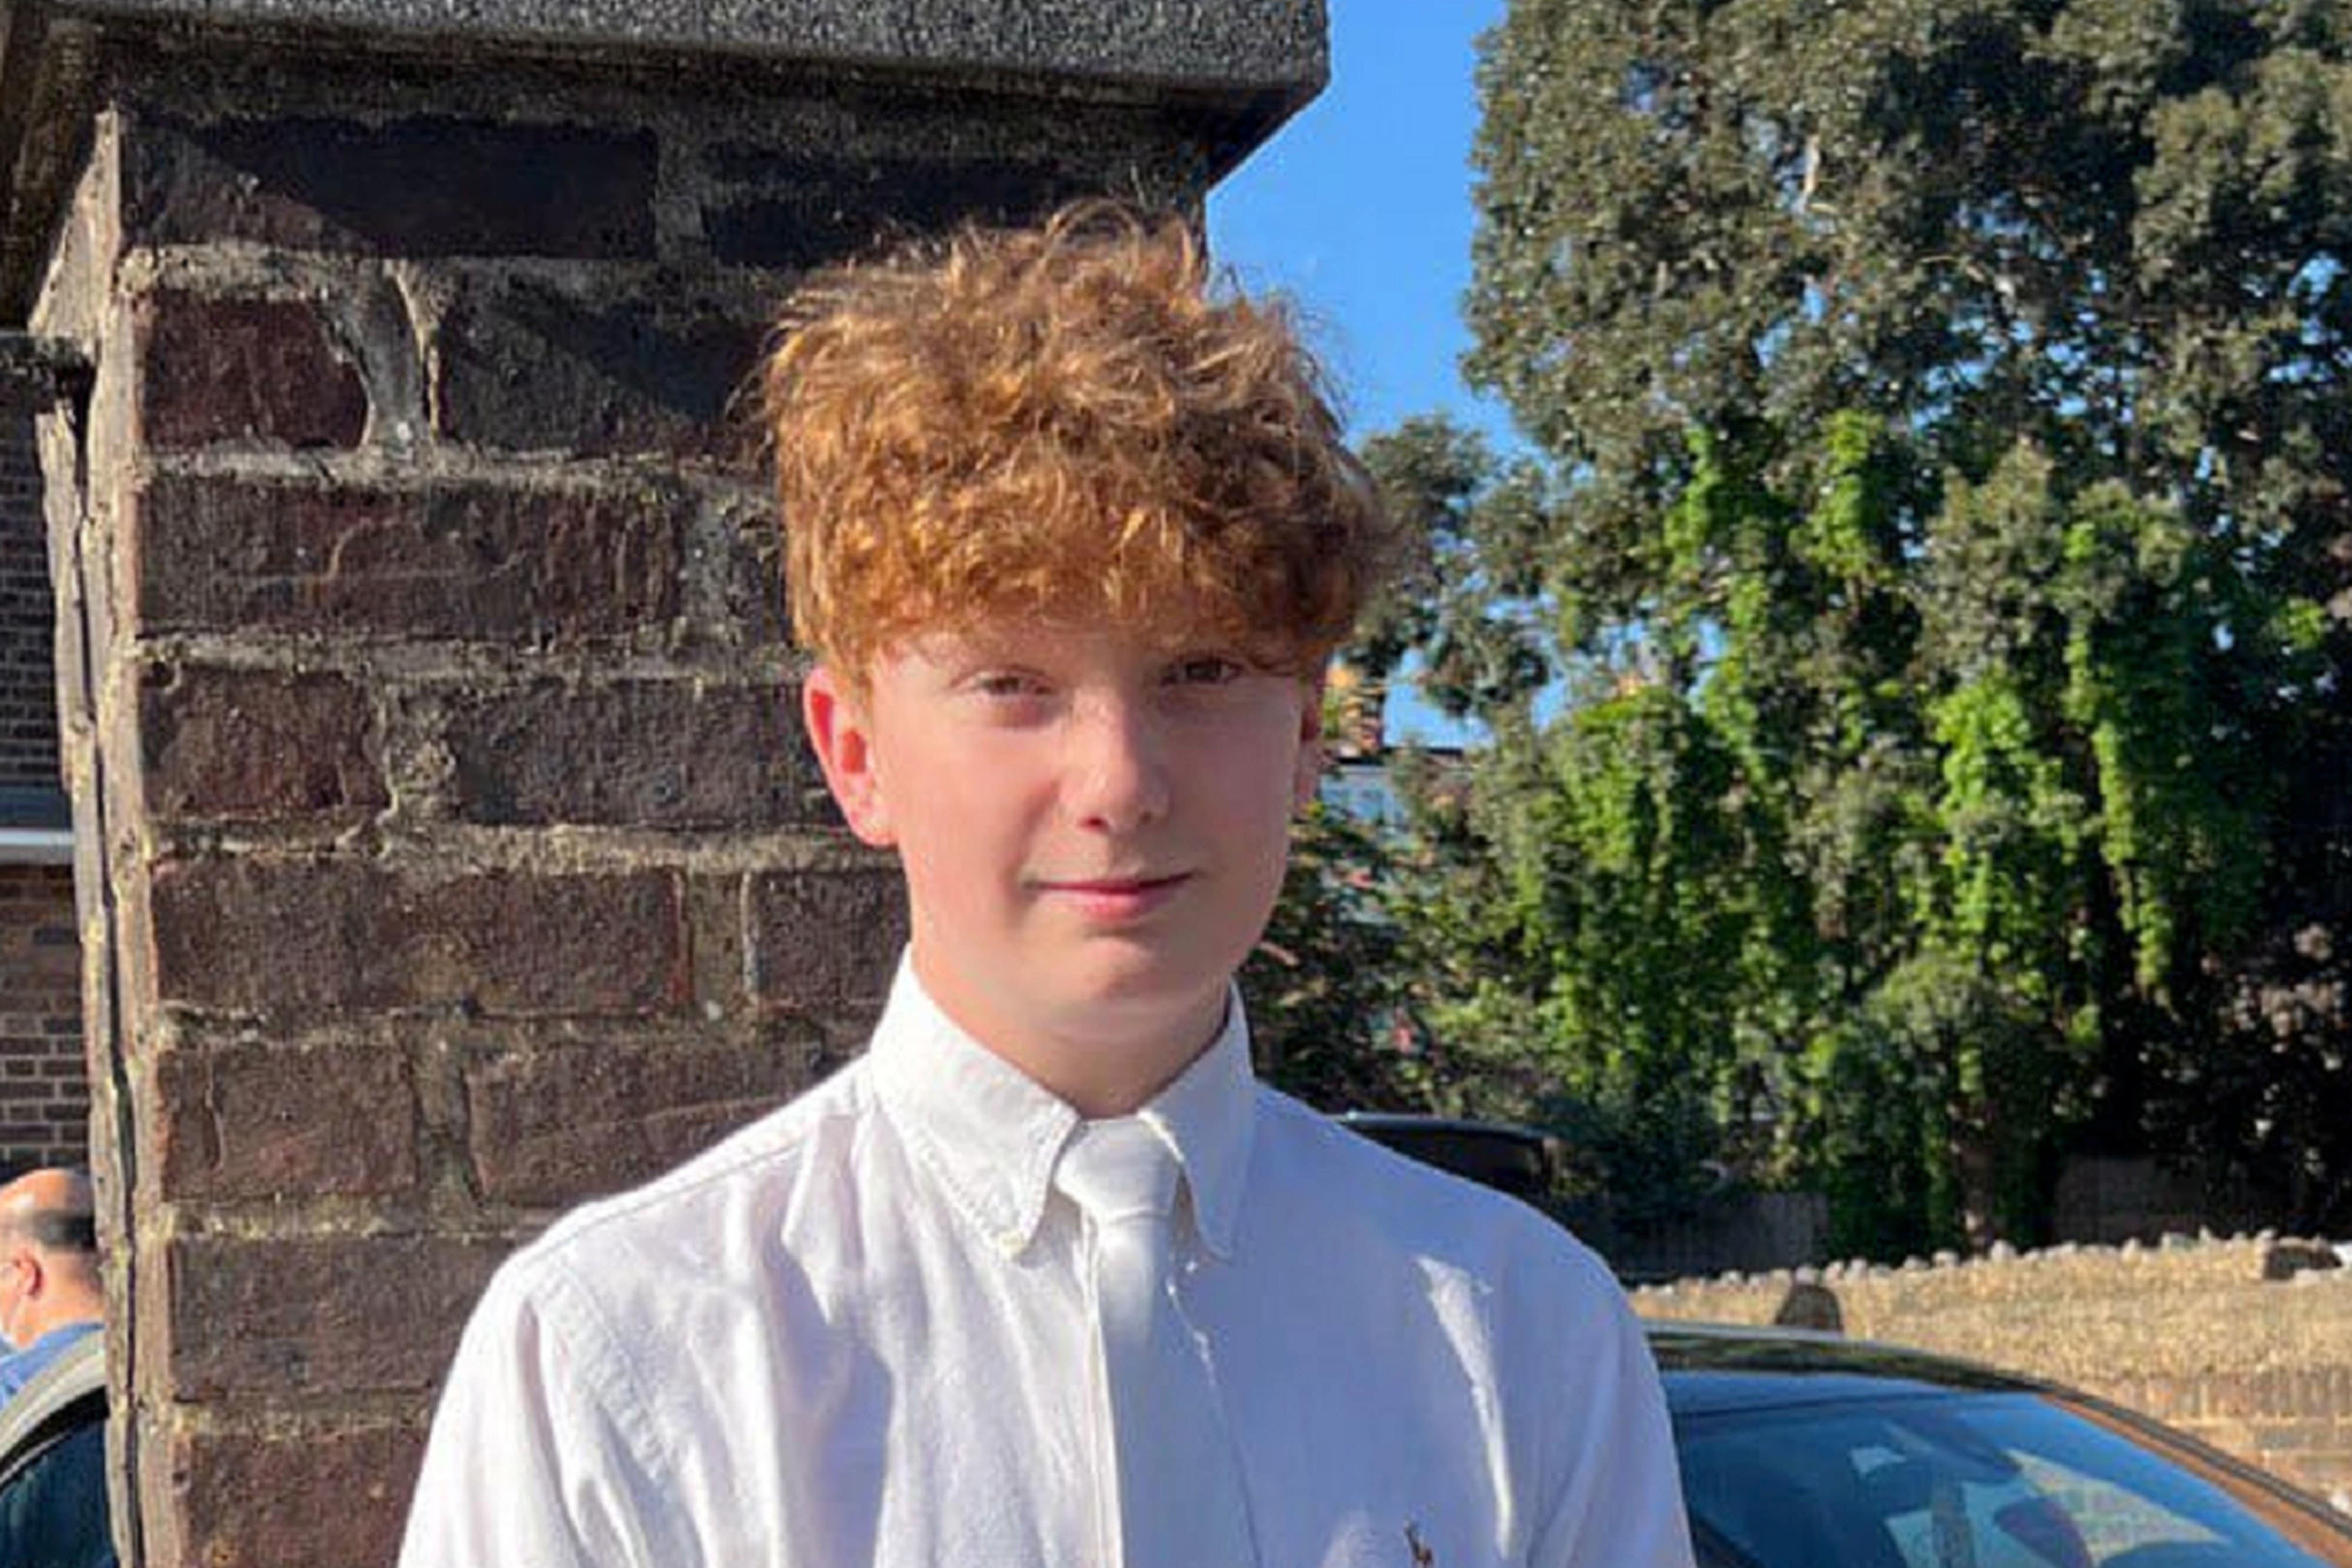 Harry Pitman was stabbed to death on New Year’s Eve in London